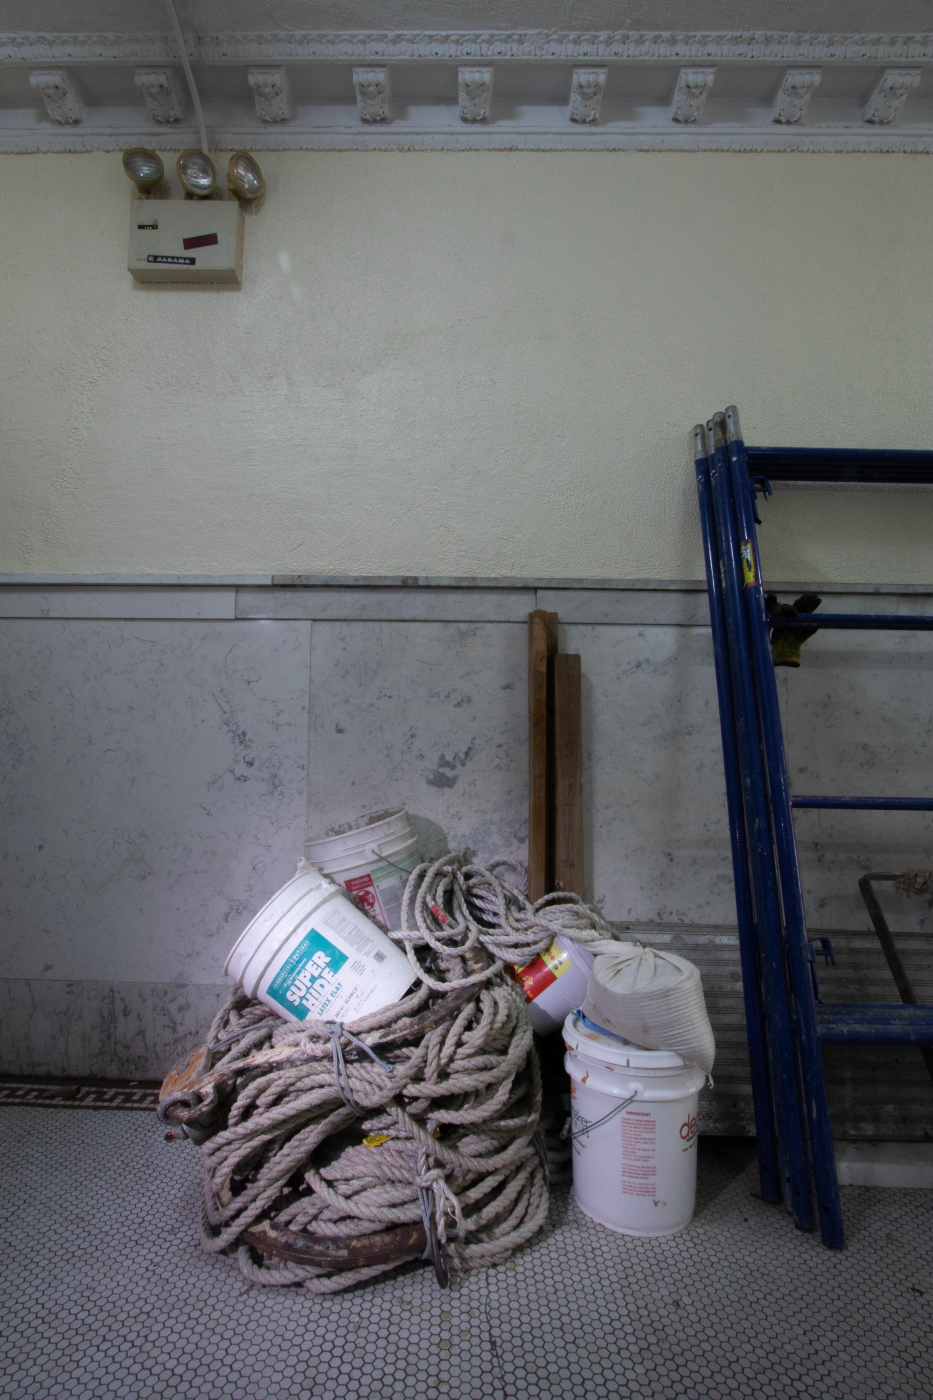 photo of rope and supplies in hallway